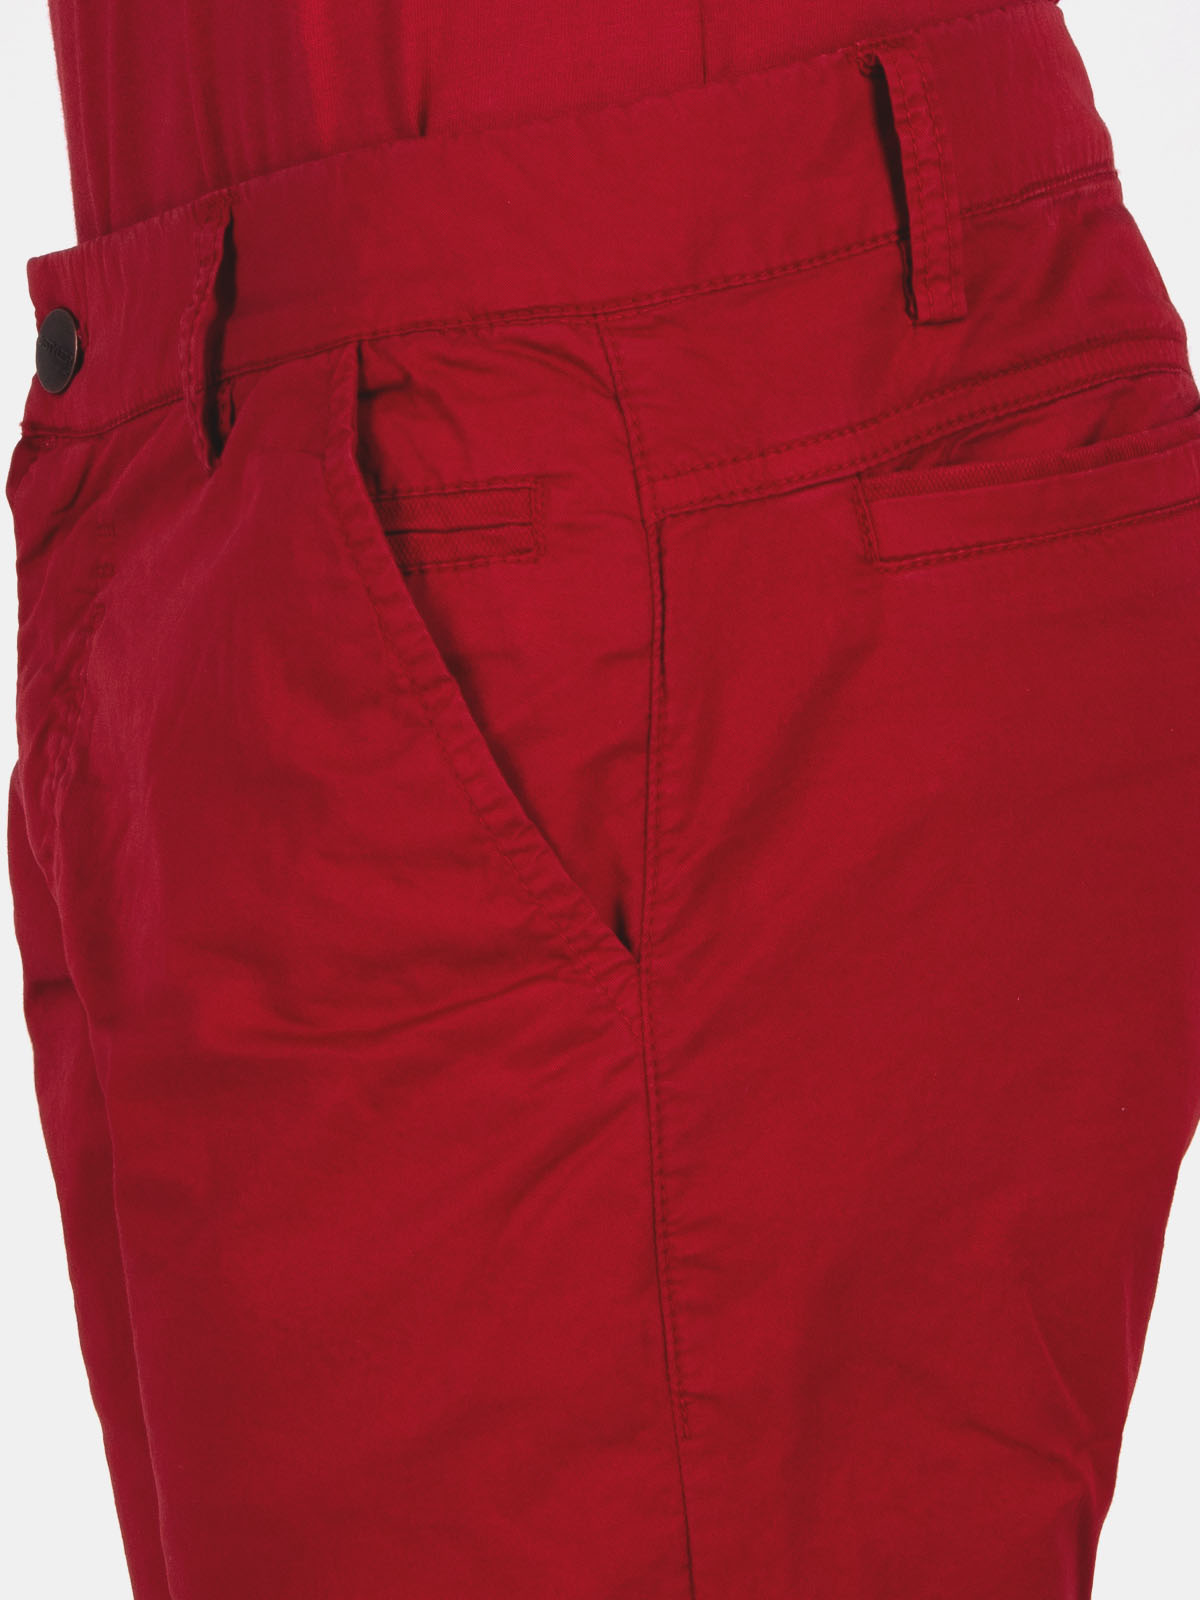  red shorts  - 67062 € 27.00 img4